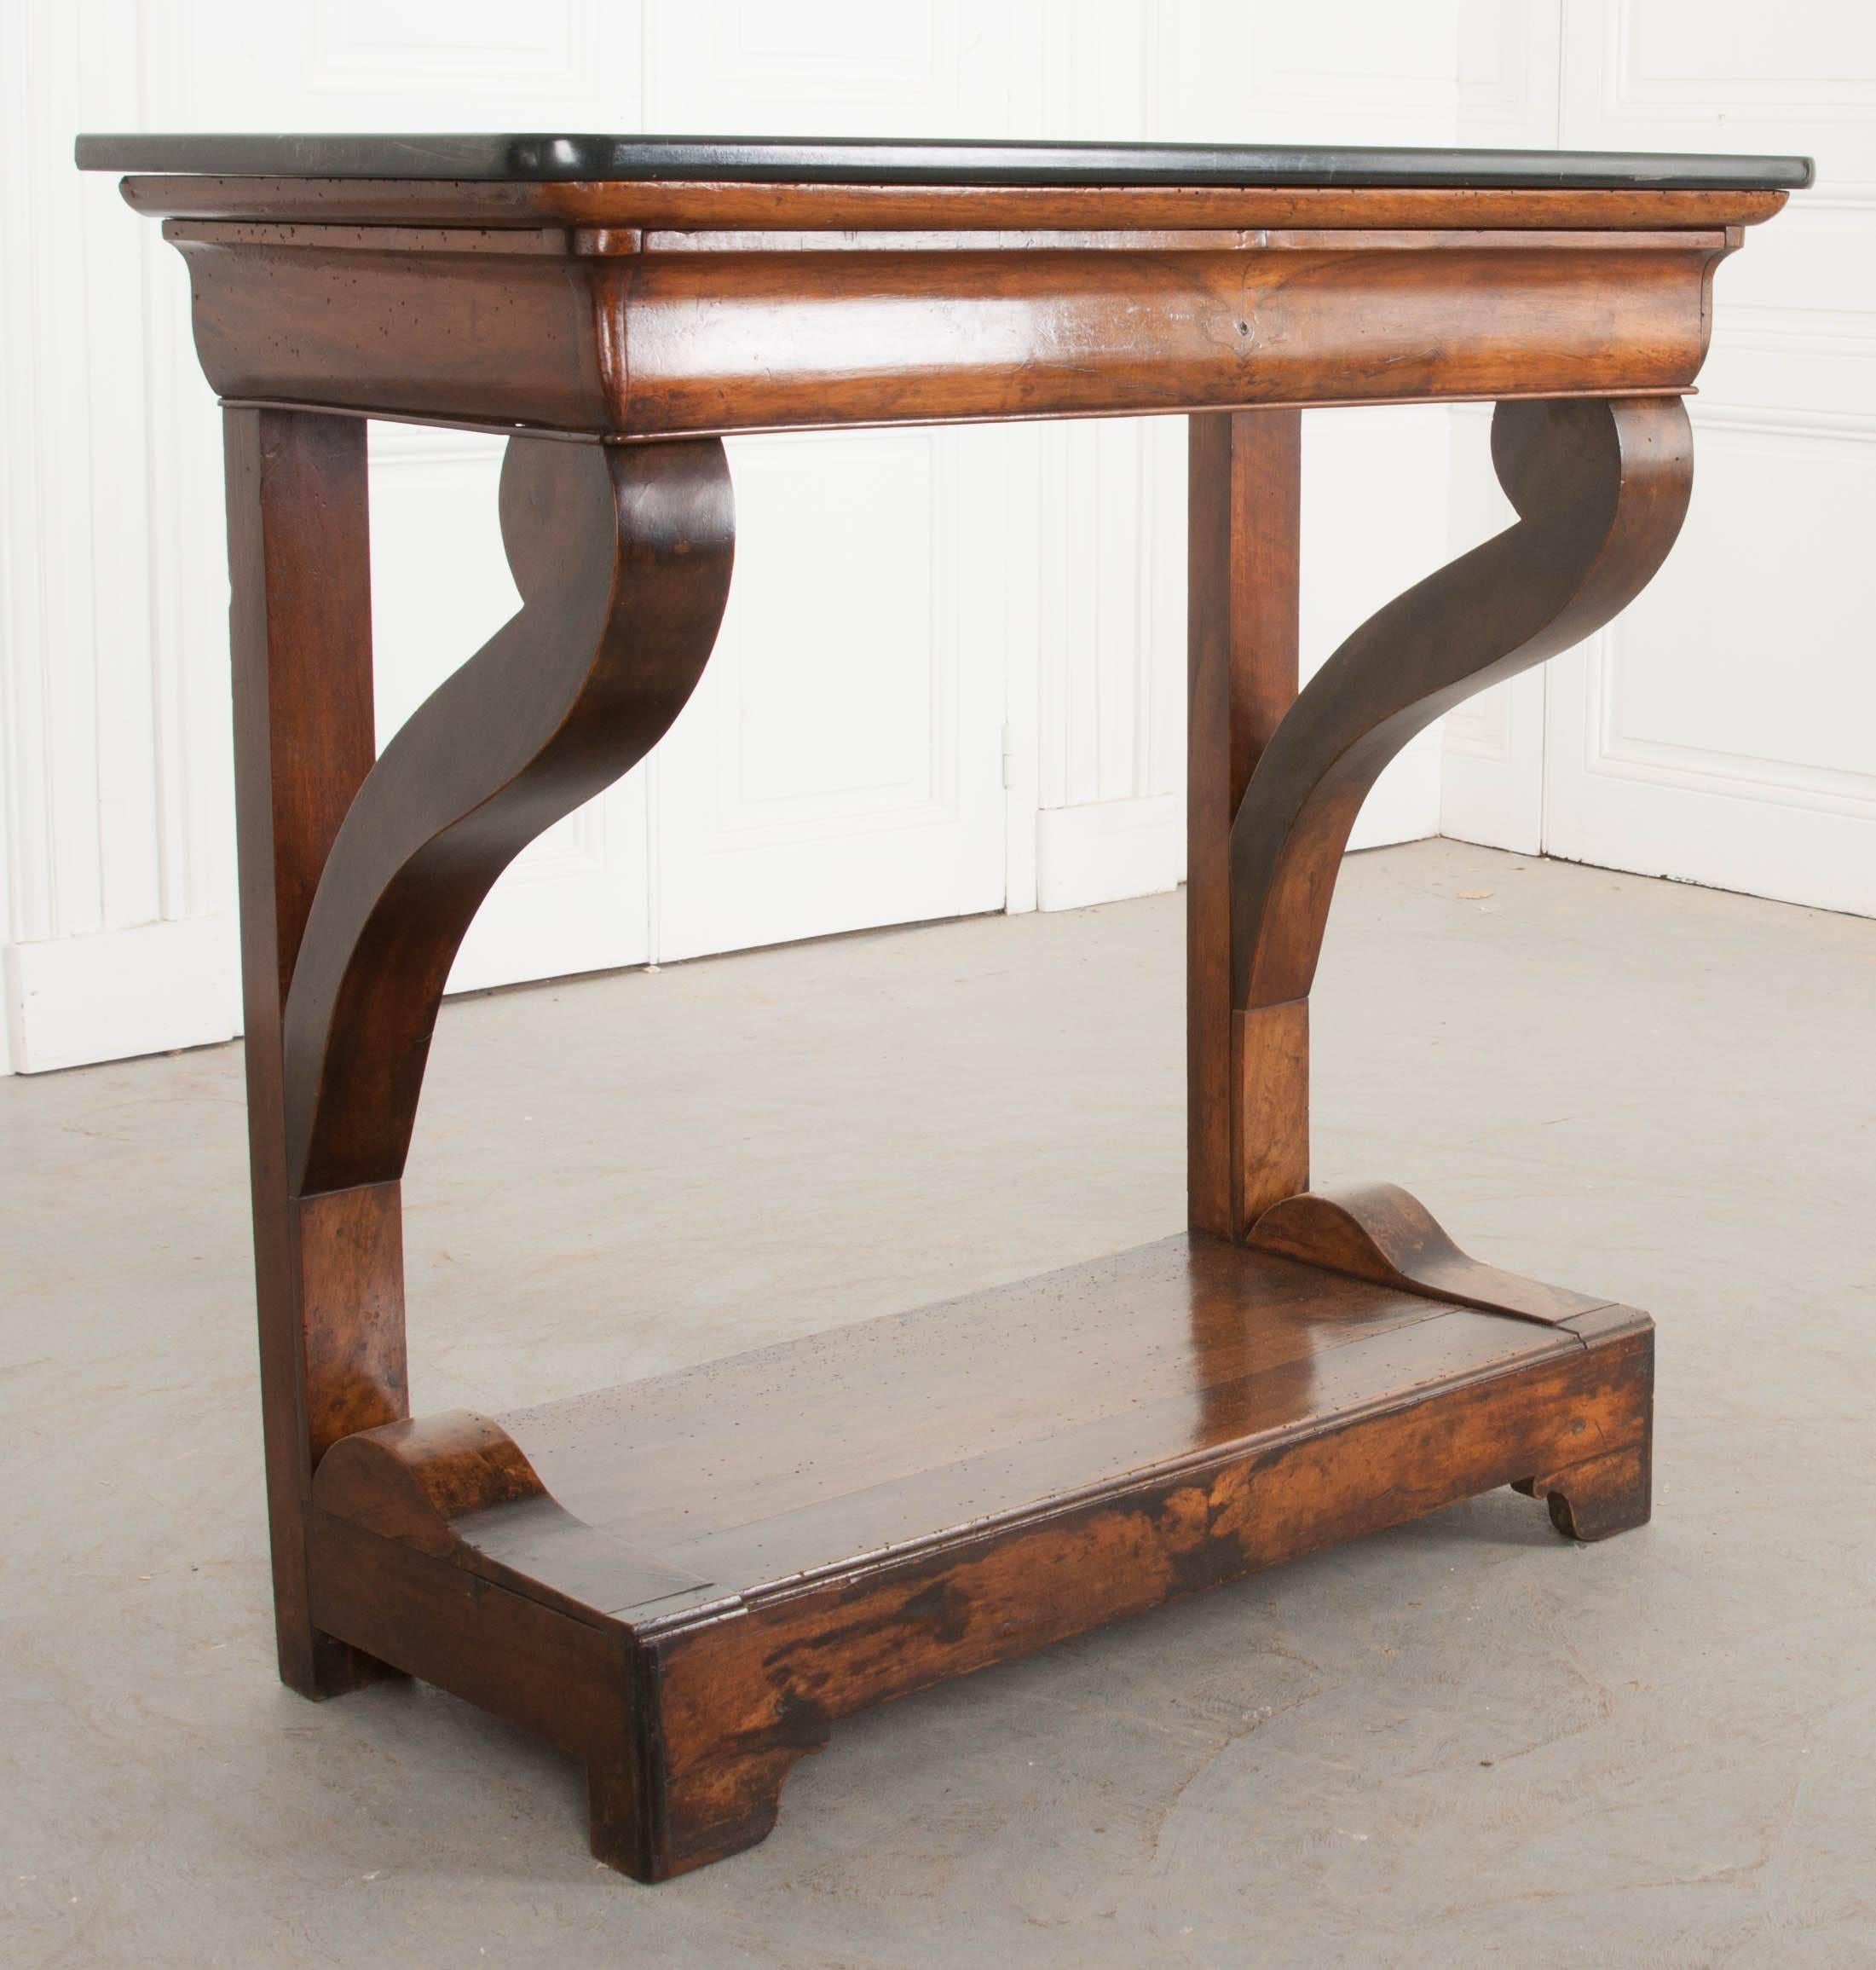 This gorgeous marble-top walnut console was made in France around the middle of the 19th century. The black marble top has rounded front corners and is original to the console. Below the marble, a hidden drawer exists in the table’s shaped apron.